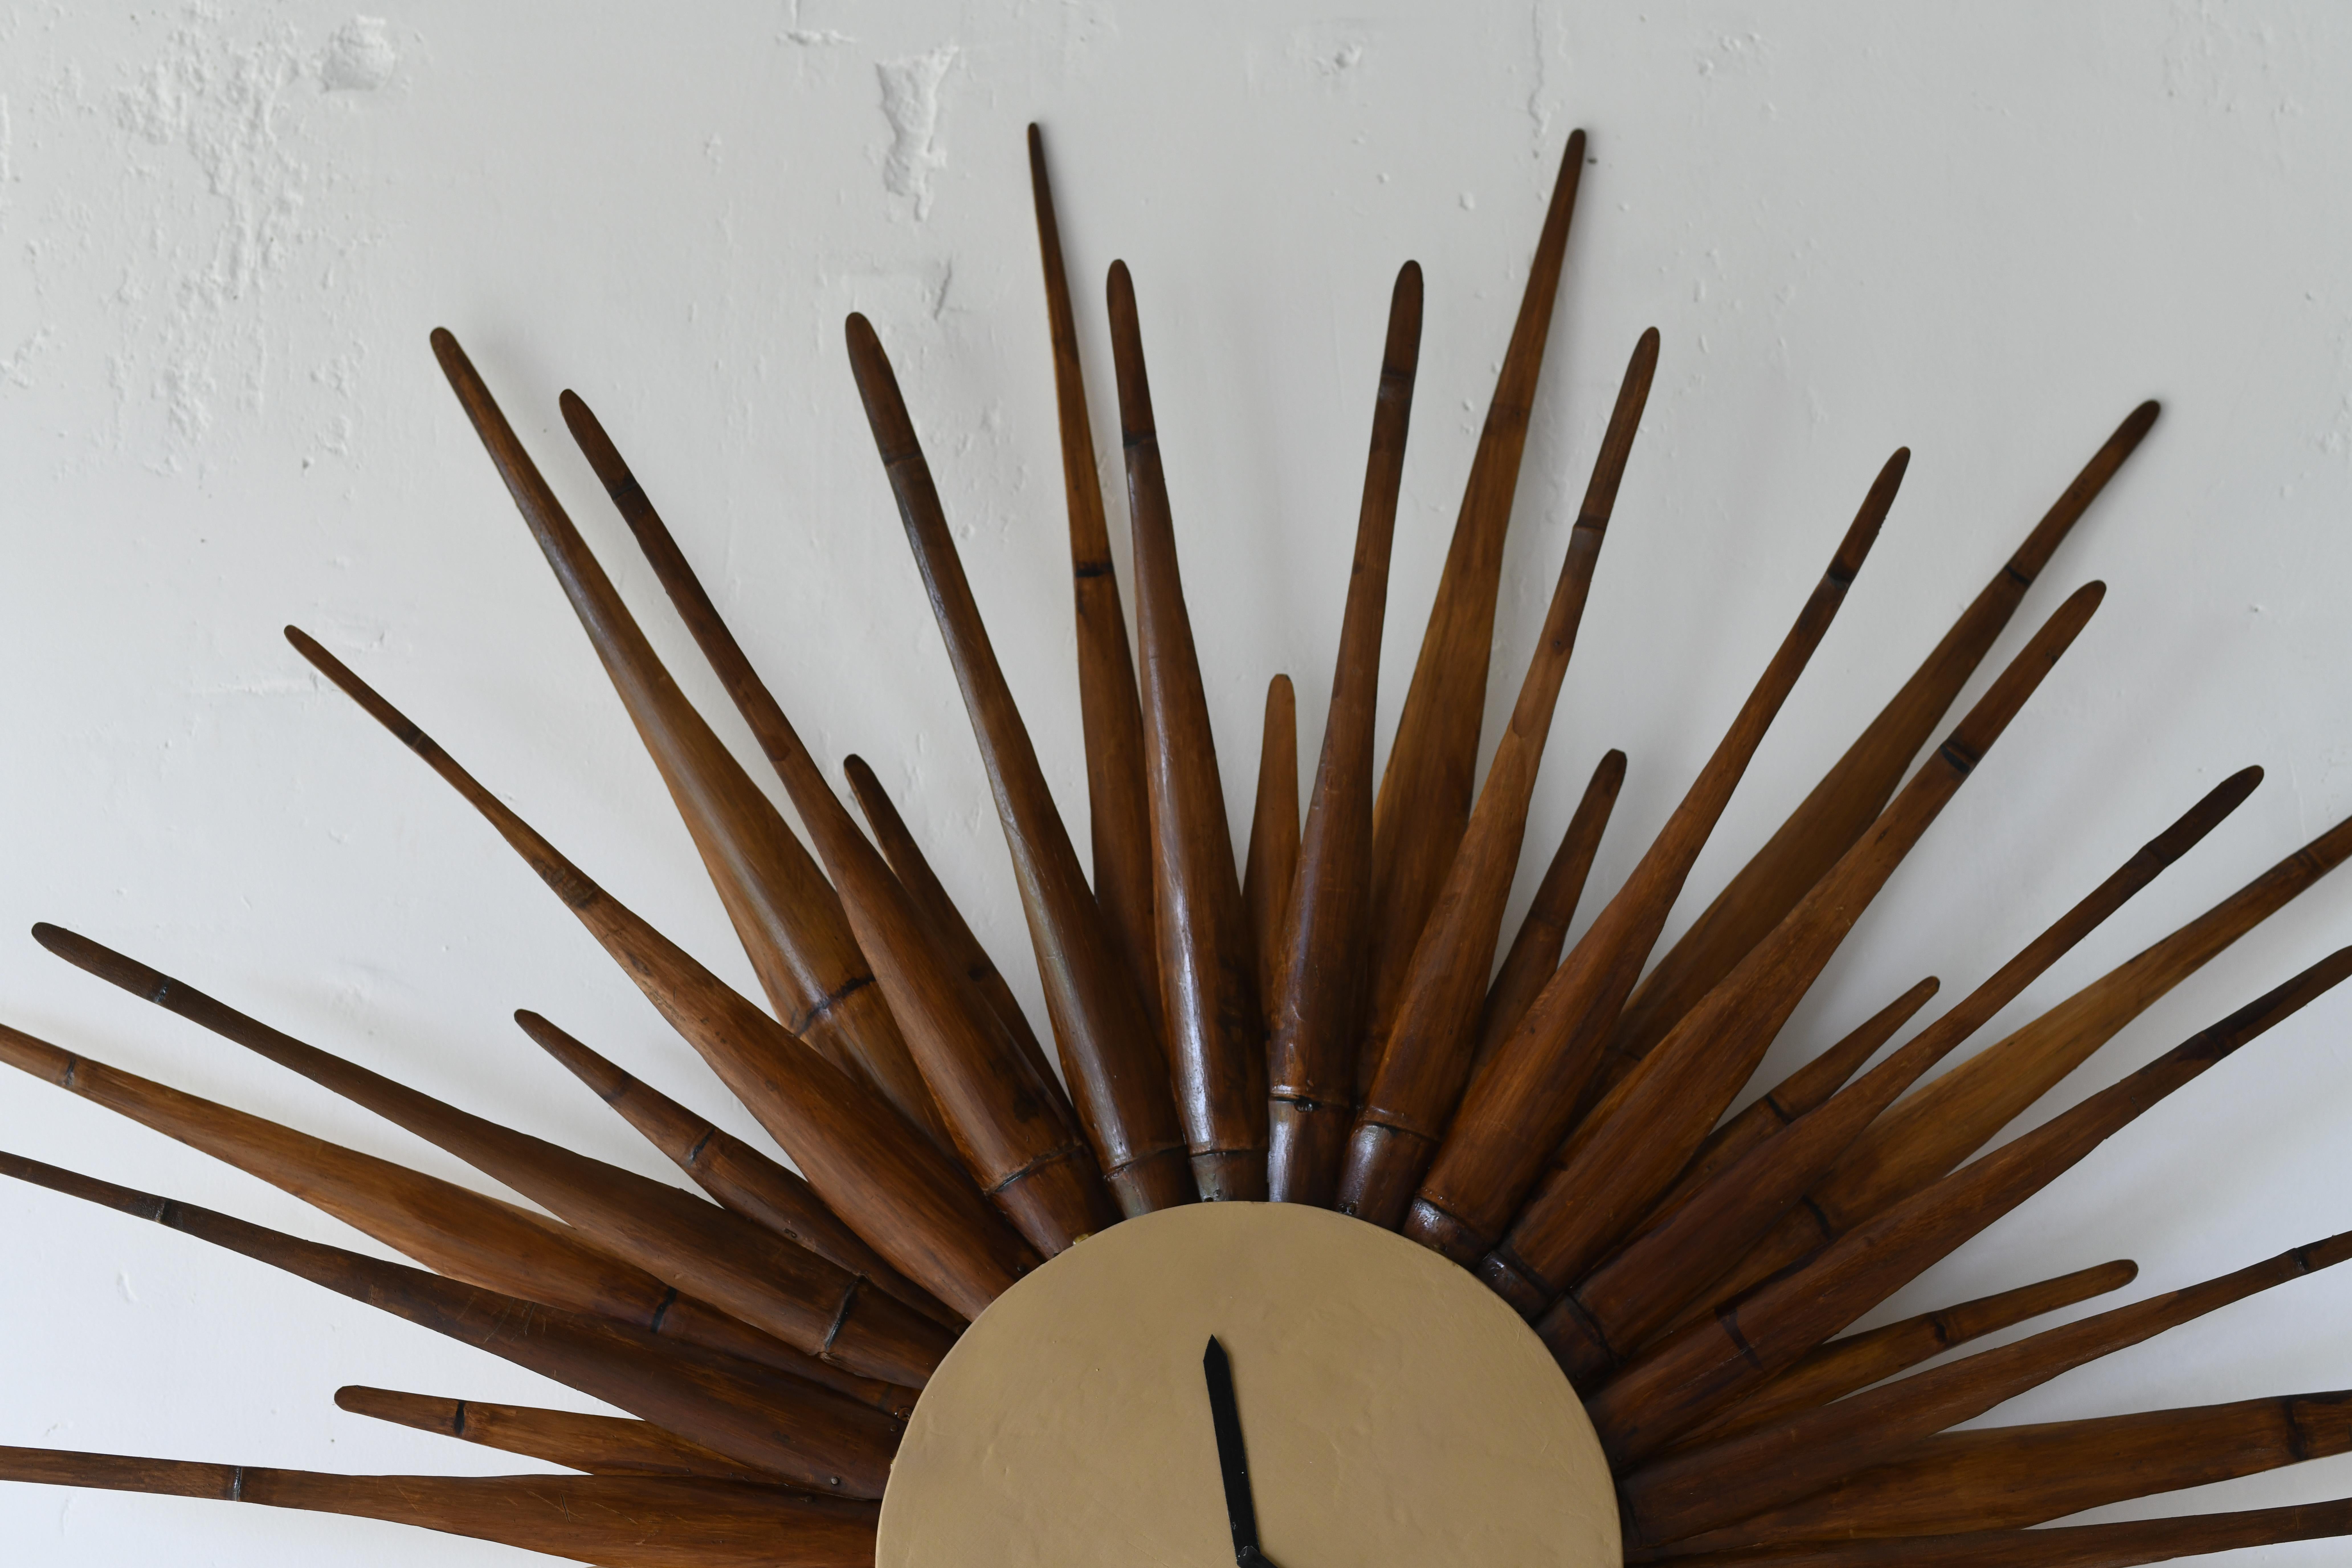 We have created a fabulous Sunburst.
Mid-Century Modern style sunburst clock. It's a patinated version with a golden face with 48 textural bamboo hand-carved spokes. Wall mounted or leaning on the floor very much an anchor piece for a substantial